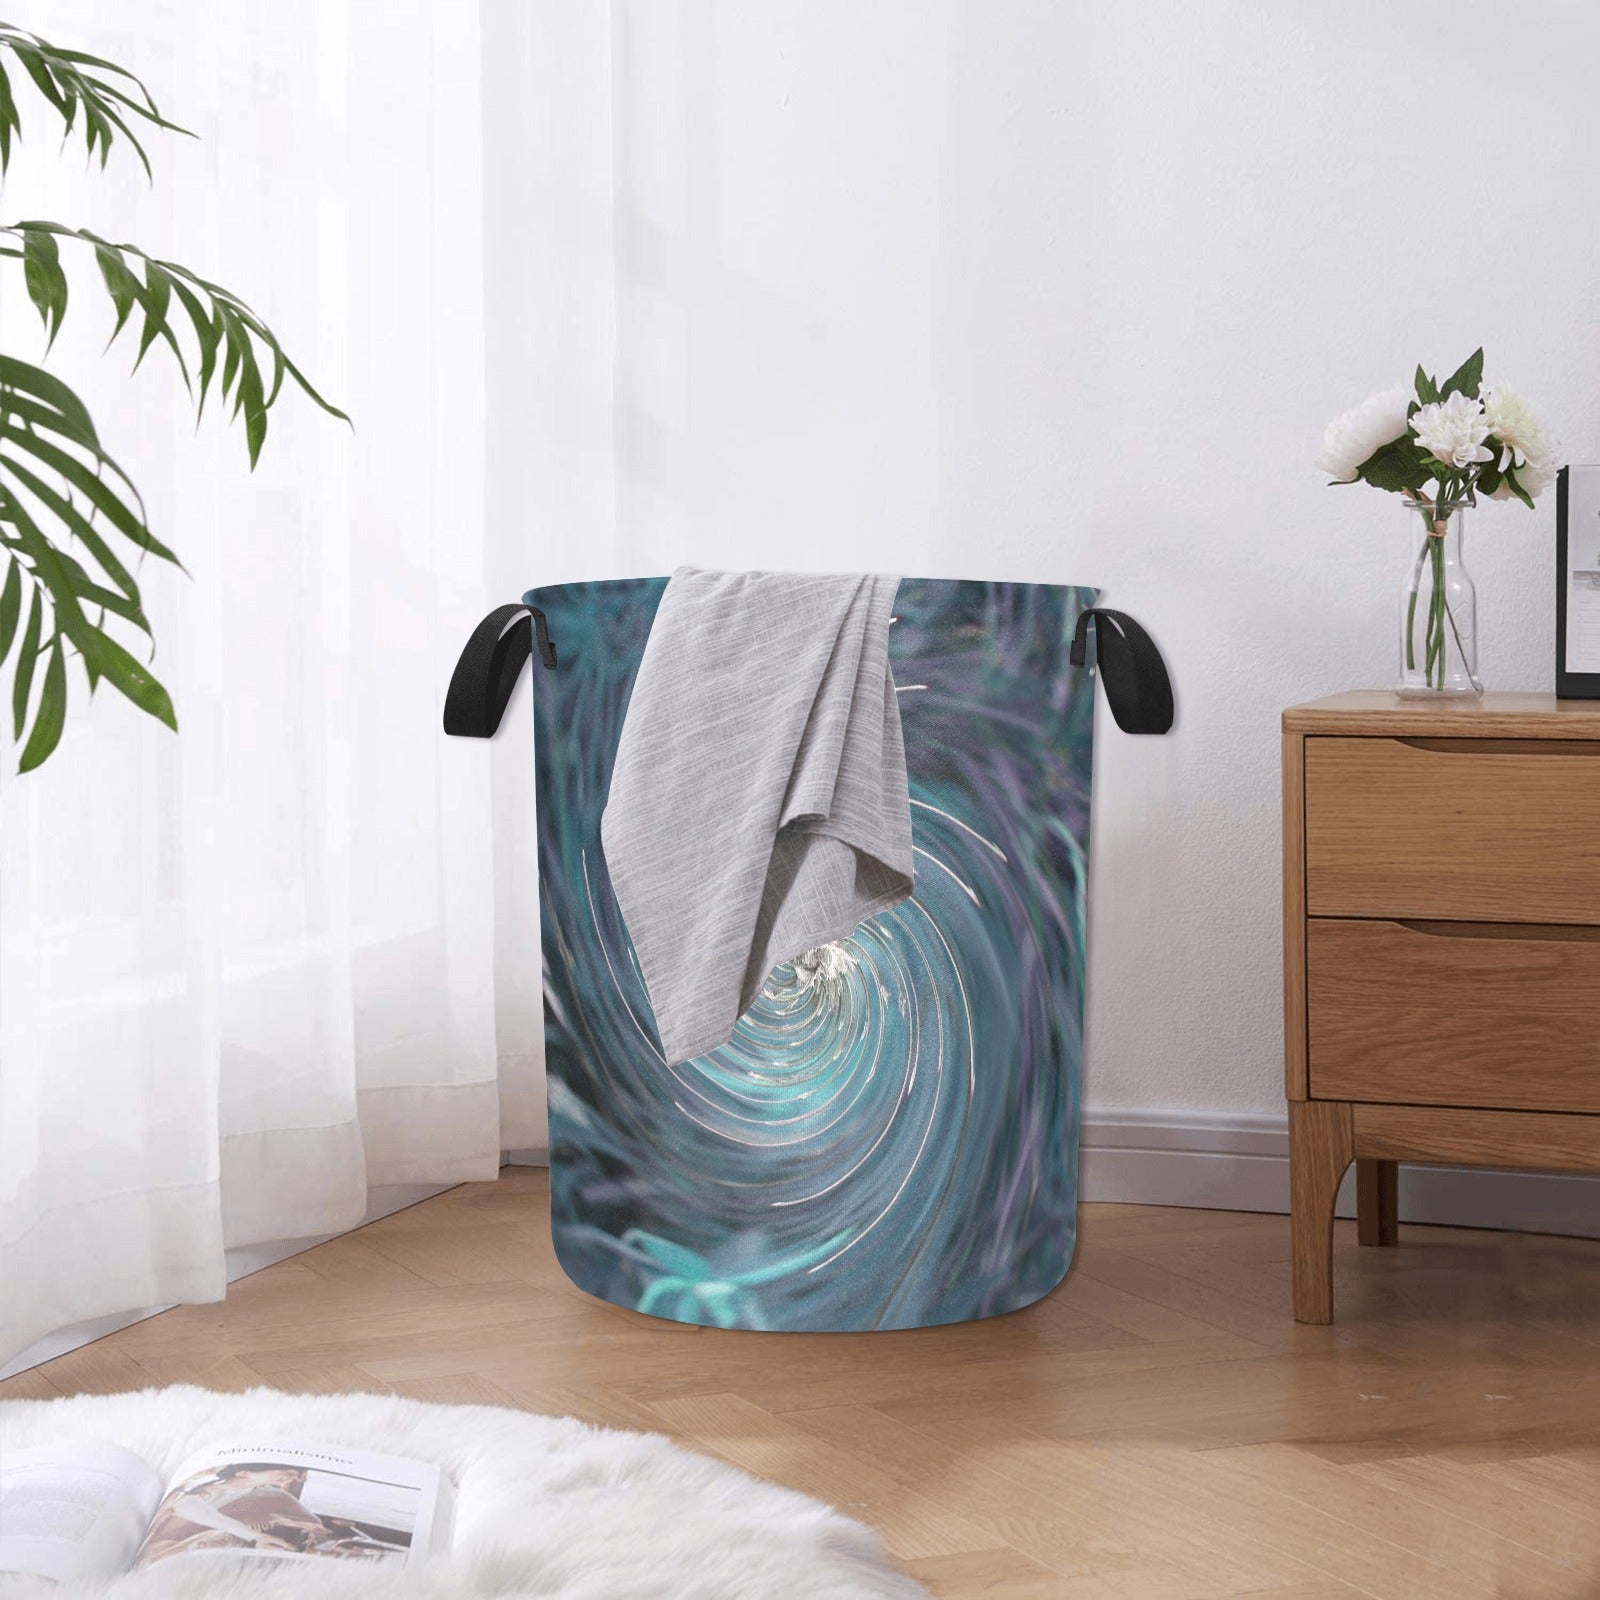 Fabric Laundry Basket with Handles, Cool Abstract Retro Black and Teal Cosmic Swirl